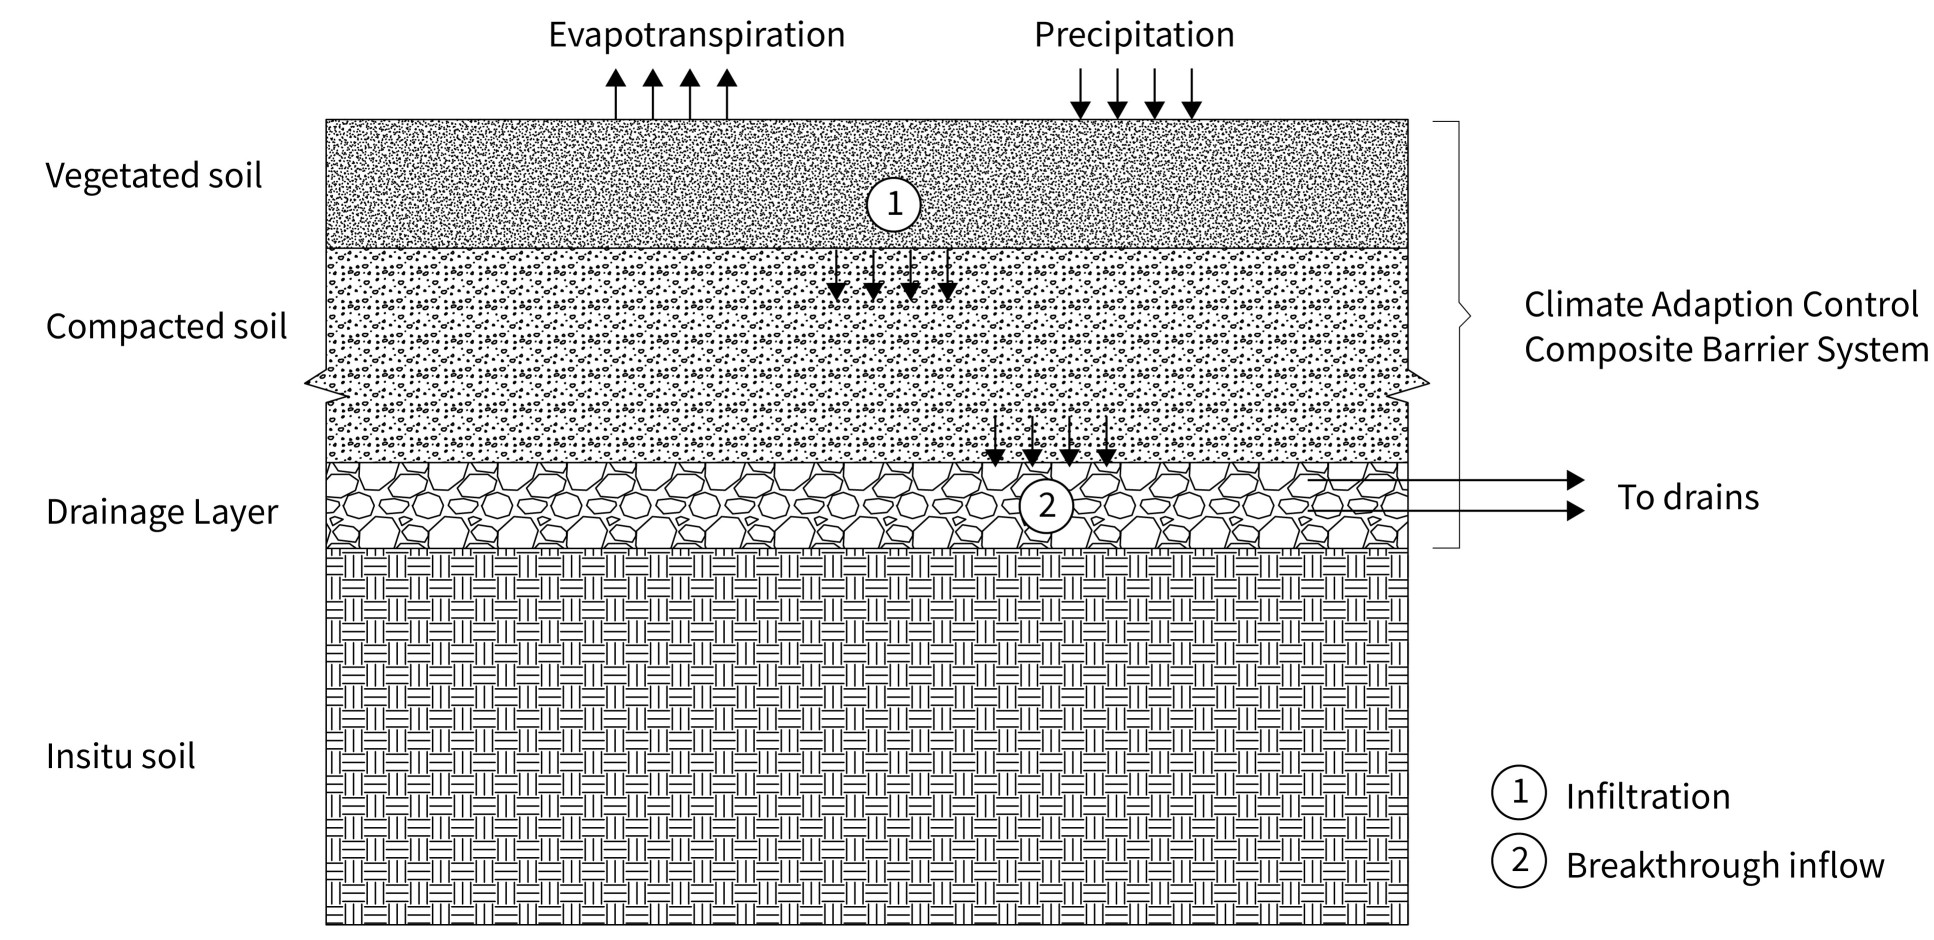 Example of a potential barrier system. The engineered layer will be permeable, of high water holding capacity and low swell-shrink potential to facilitate drainage, delay flooding and mitigate large deformations. It will be vegetated to remove water through transpiration after rainfall events. The coarse grained layer beneath will act as capillary break to prevent water ingress during dry periods and as drainage layer in the event of breakthrough inflow. 